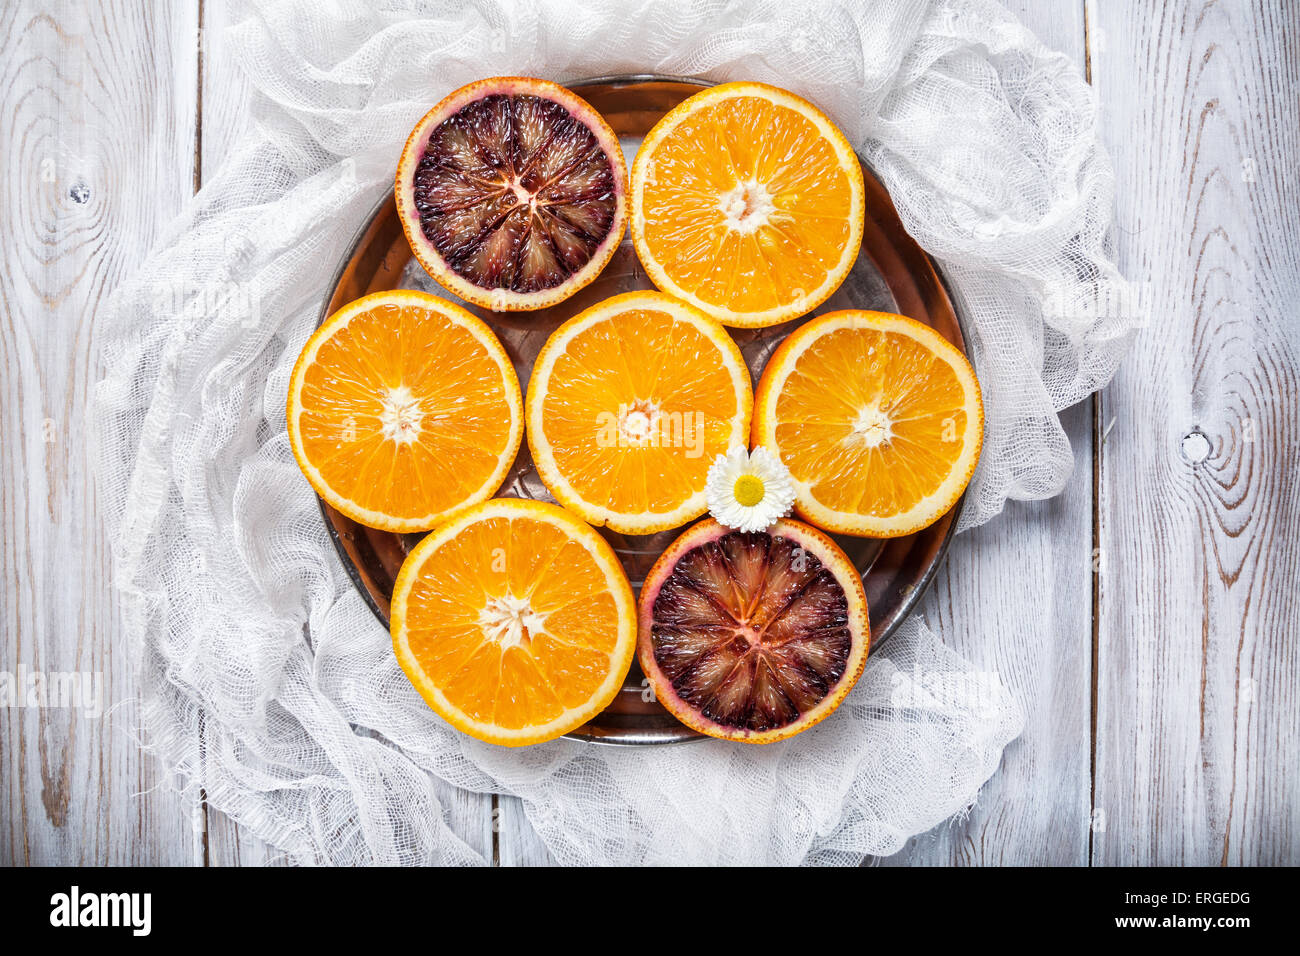 Cut Oranges on the round shape plate at white wooden background Stock Photo